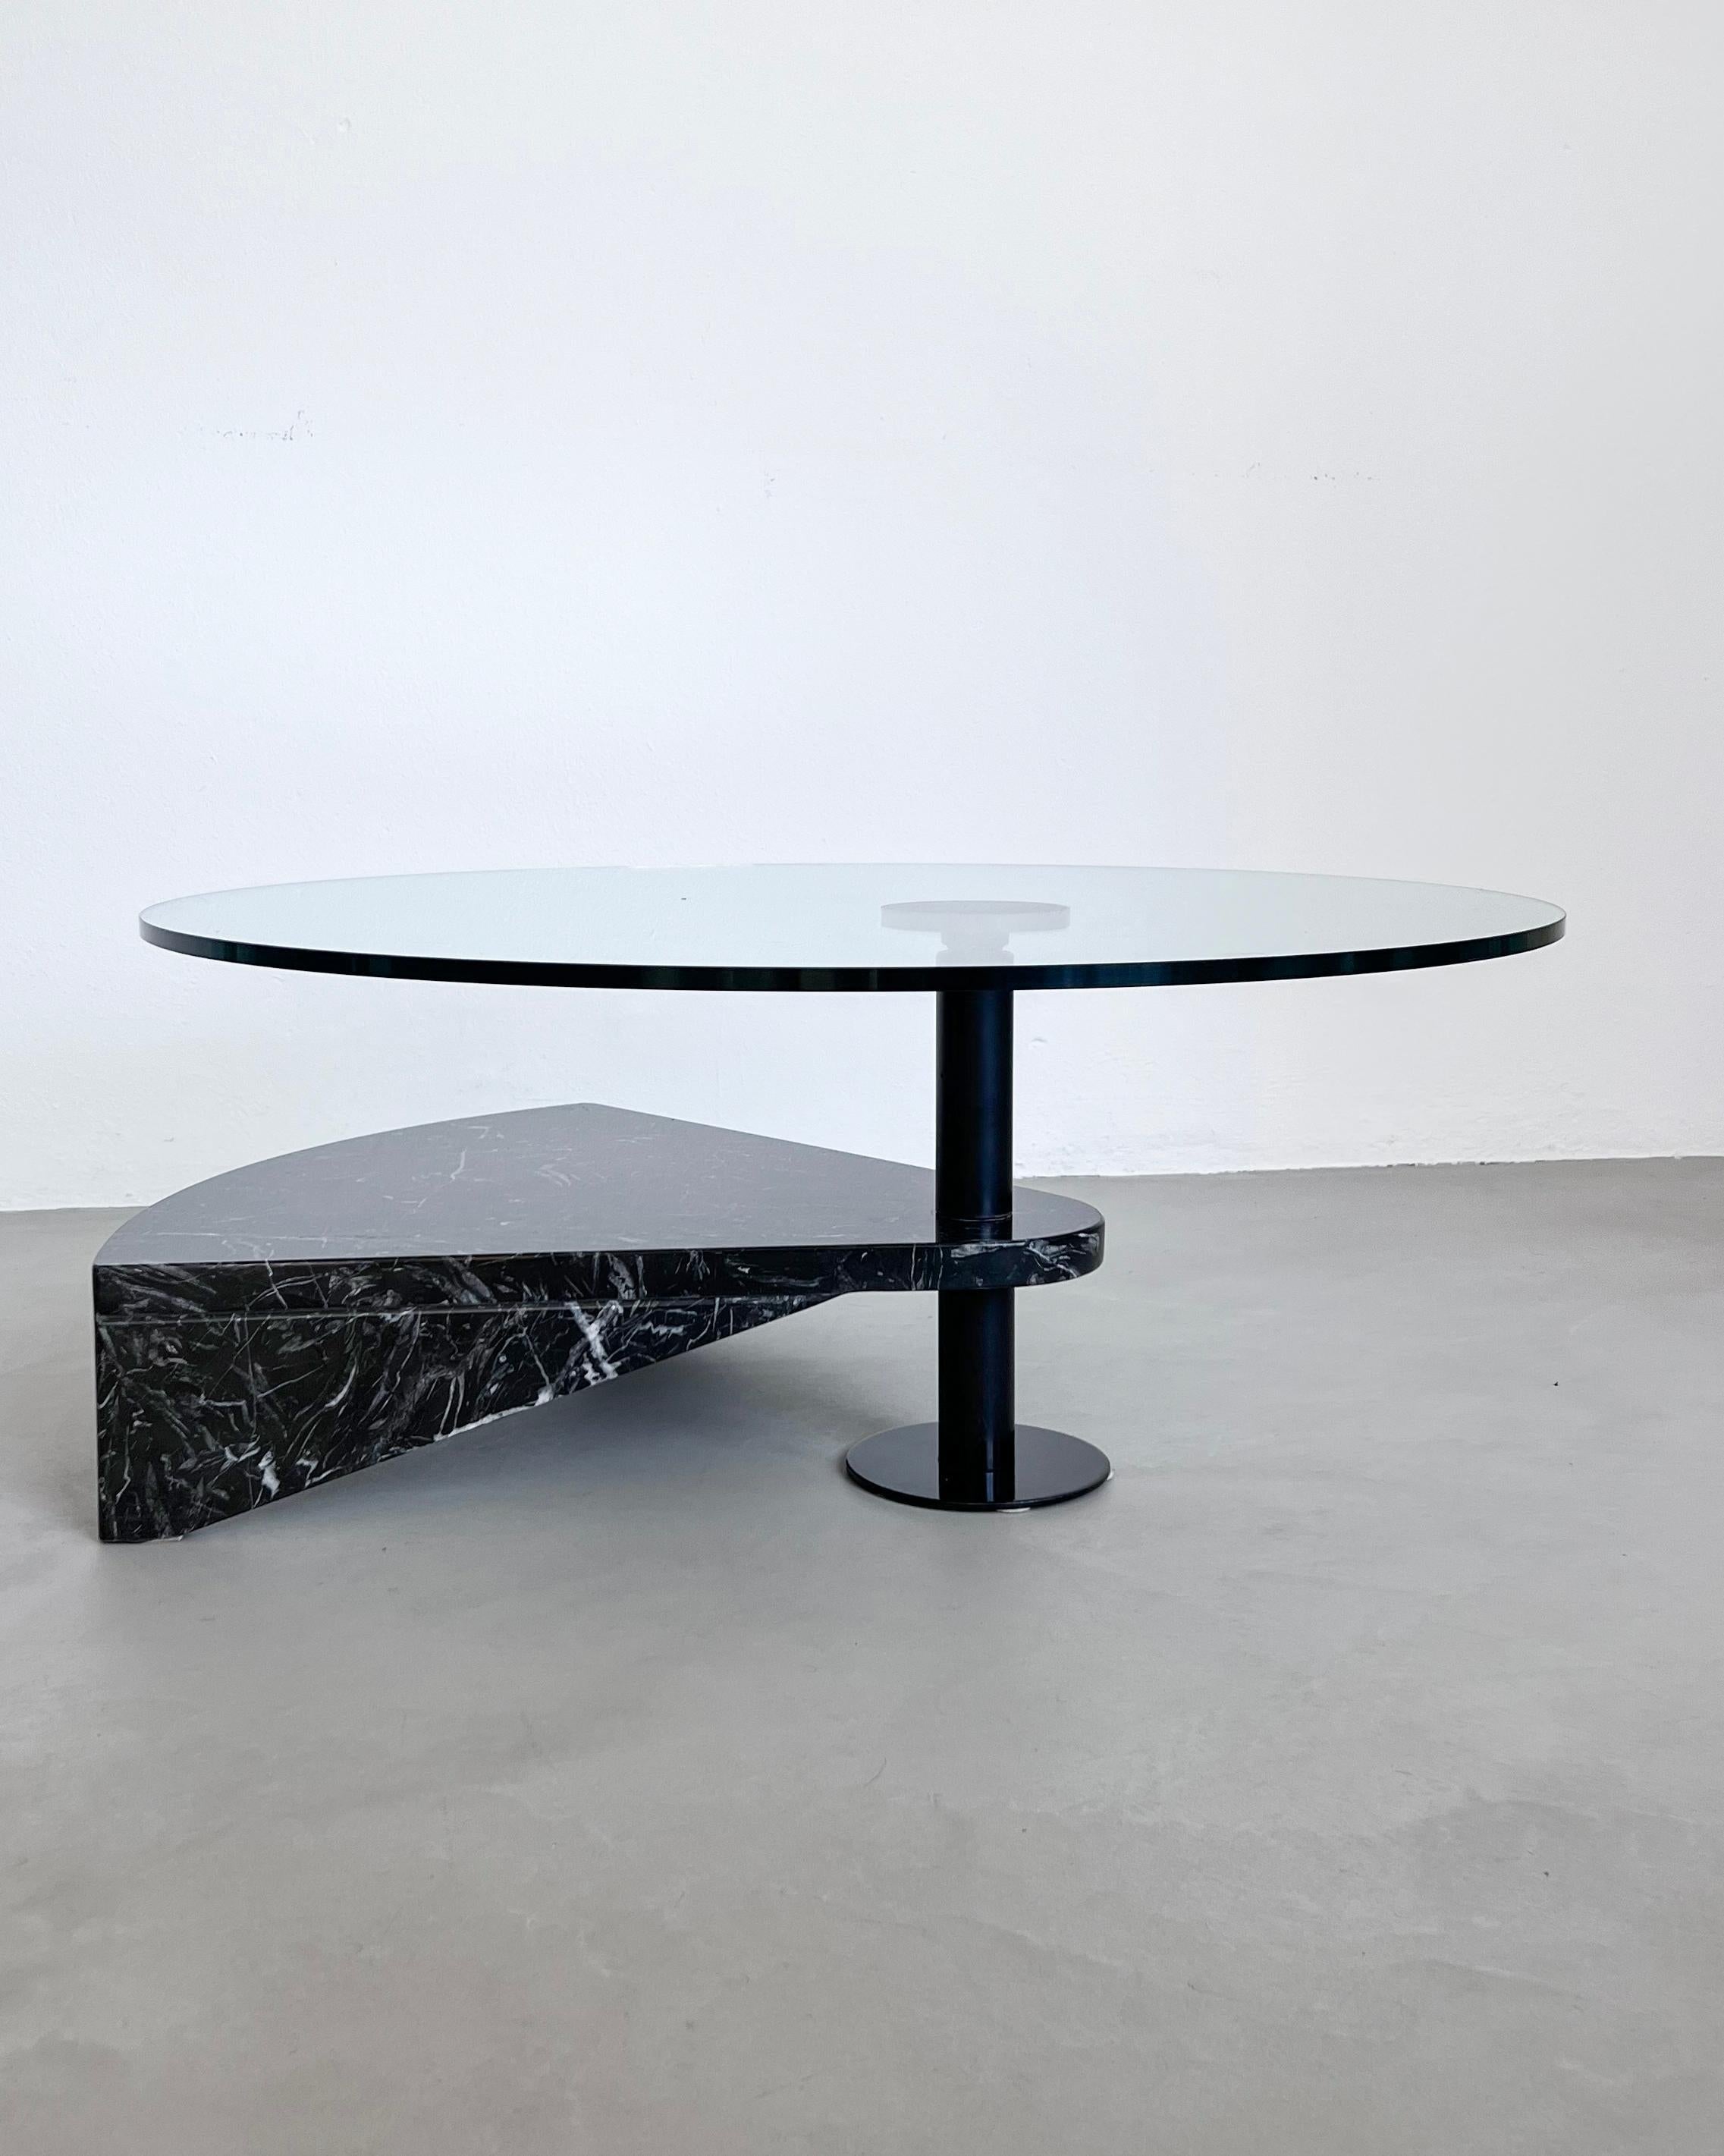 Late 20th Century Sculptural Coffee Table in Marble and Glass, Italian Collectible Design